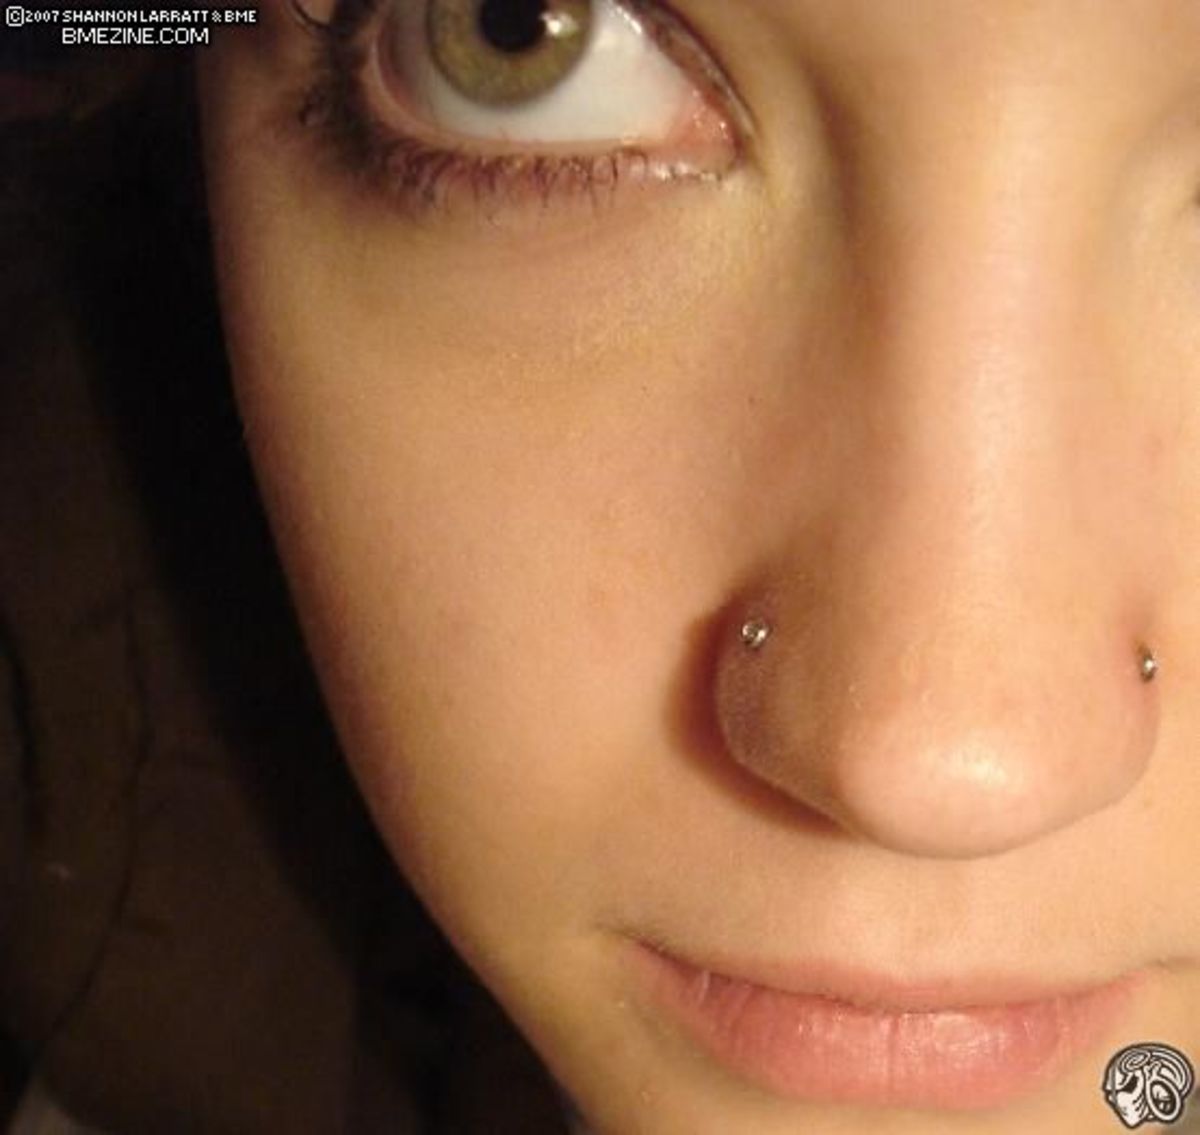 Introduction To The Types Of Nostril And Septum Nose Piercings Tatring Tattoos Piercings